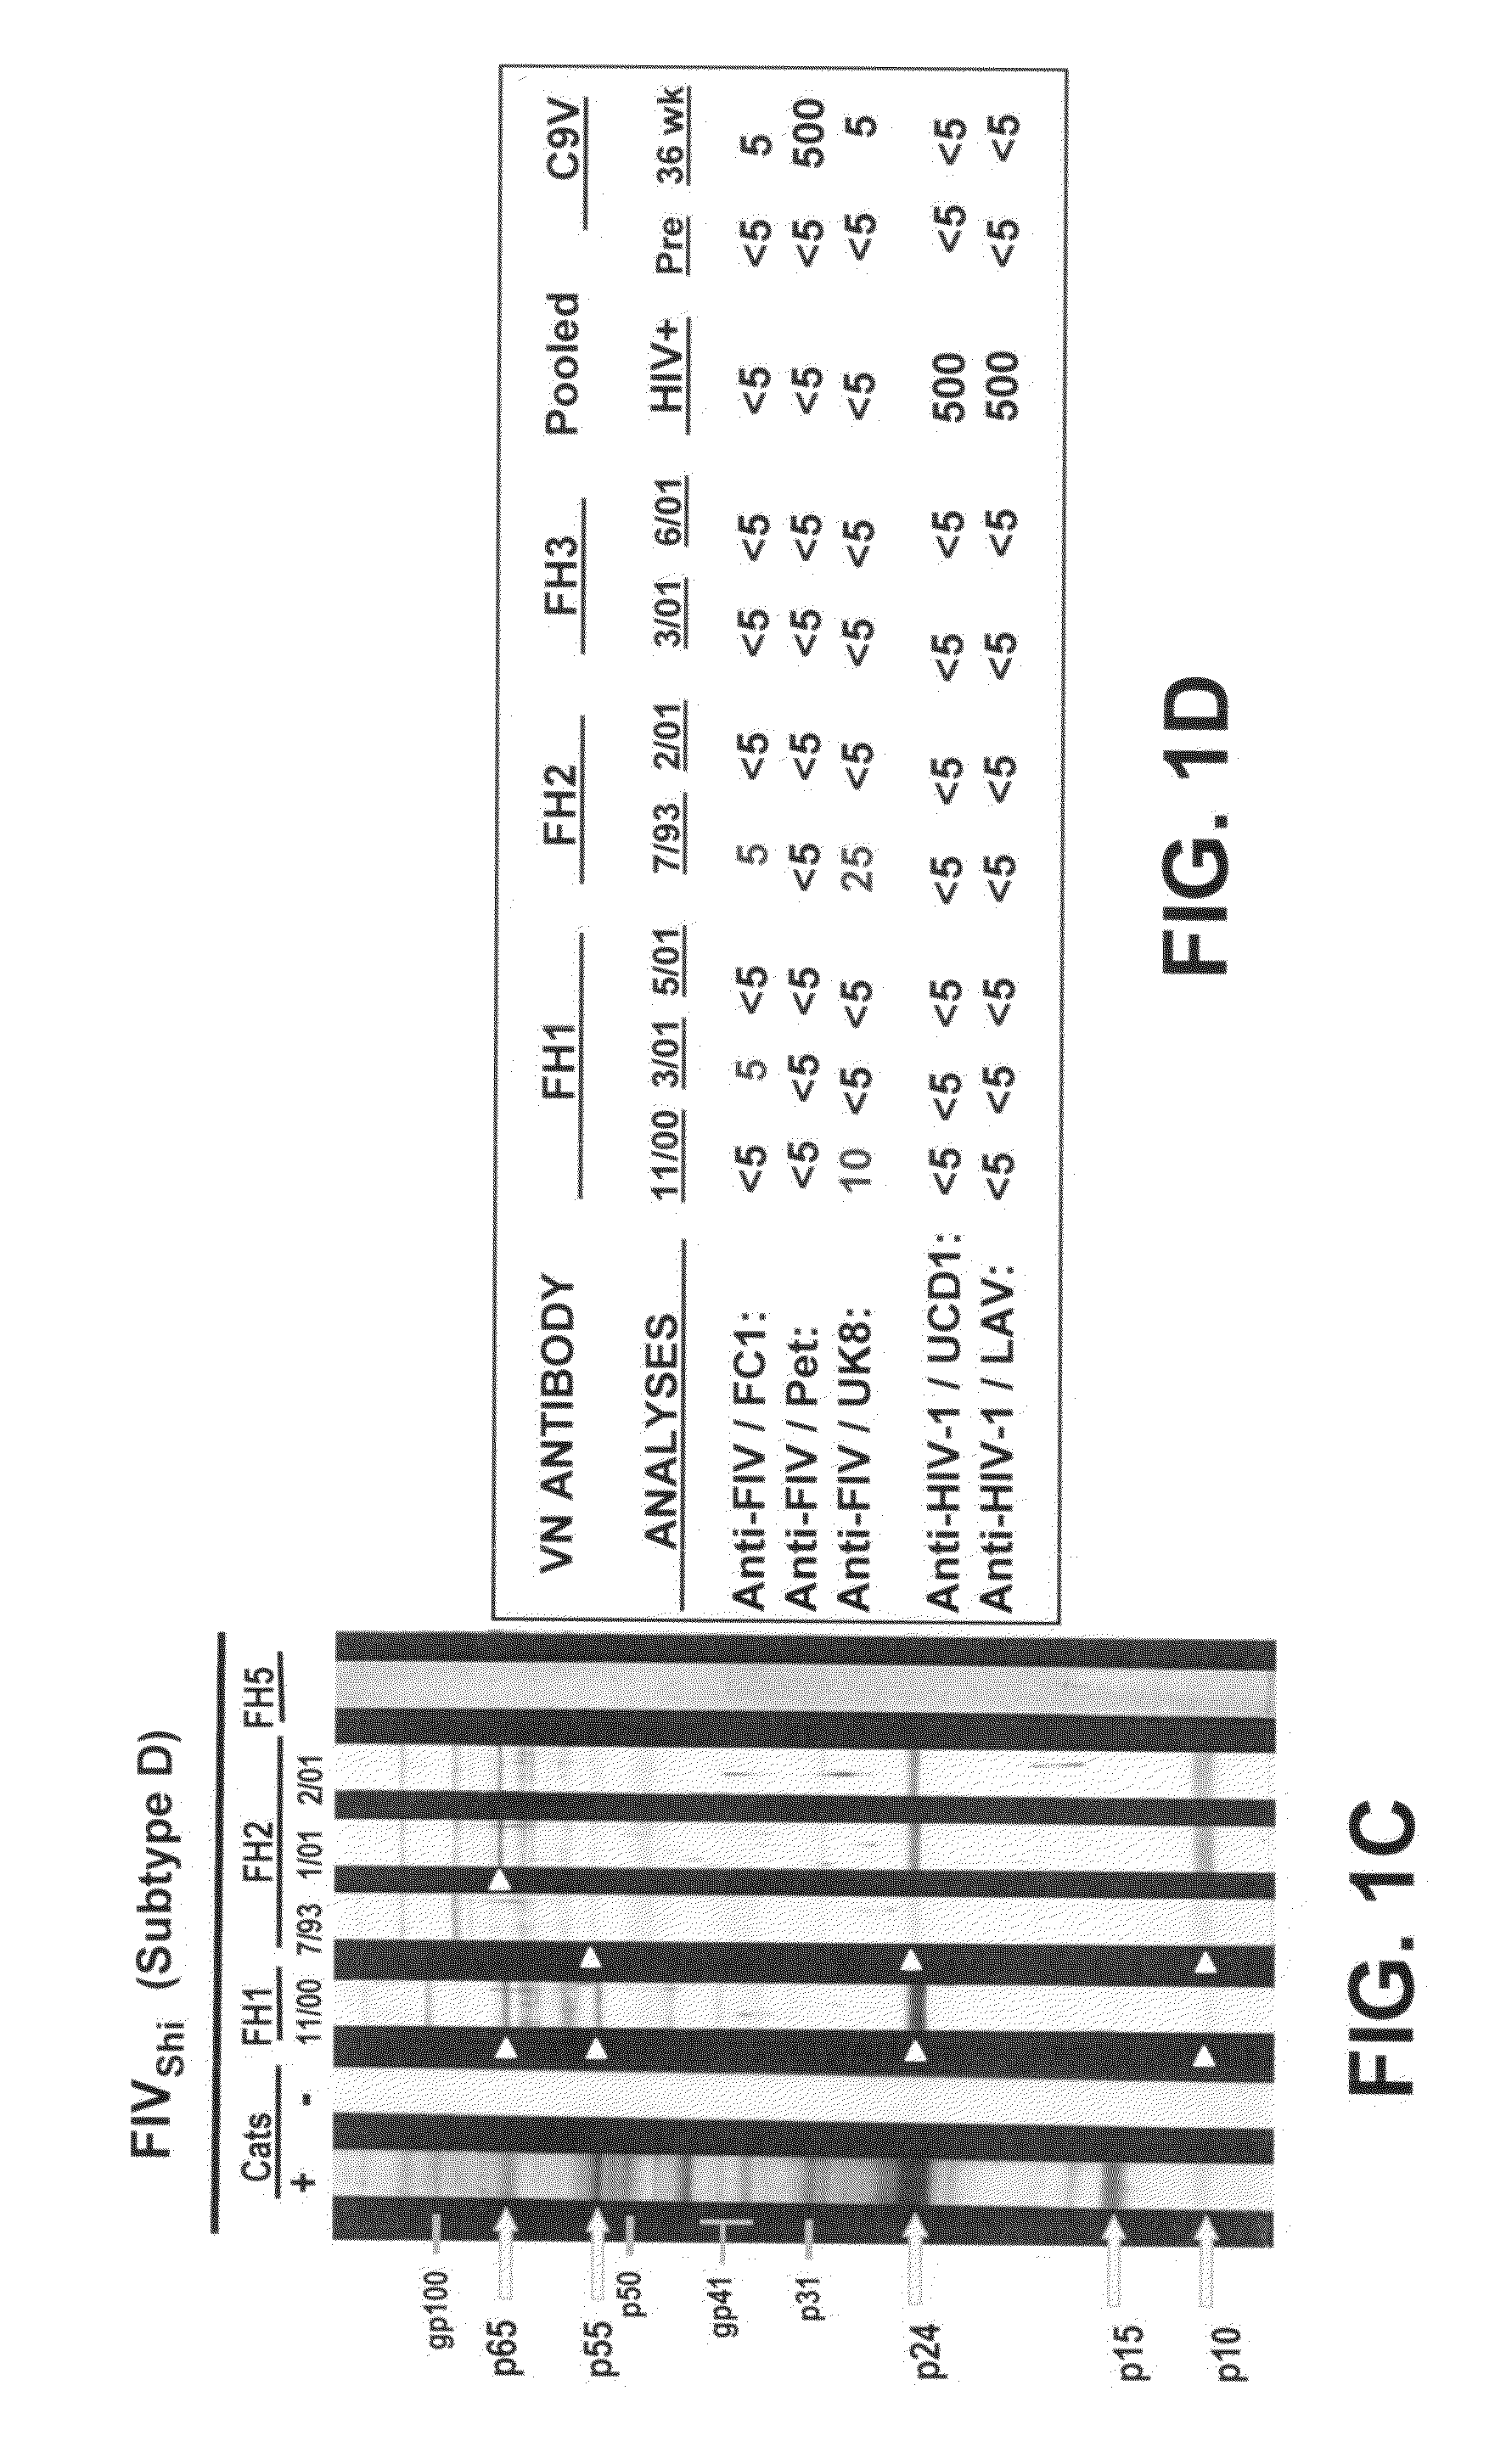 Materials and Methods for Detecting, Preventing, and Treating Retroviral Infection